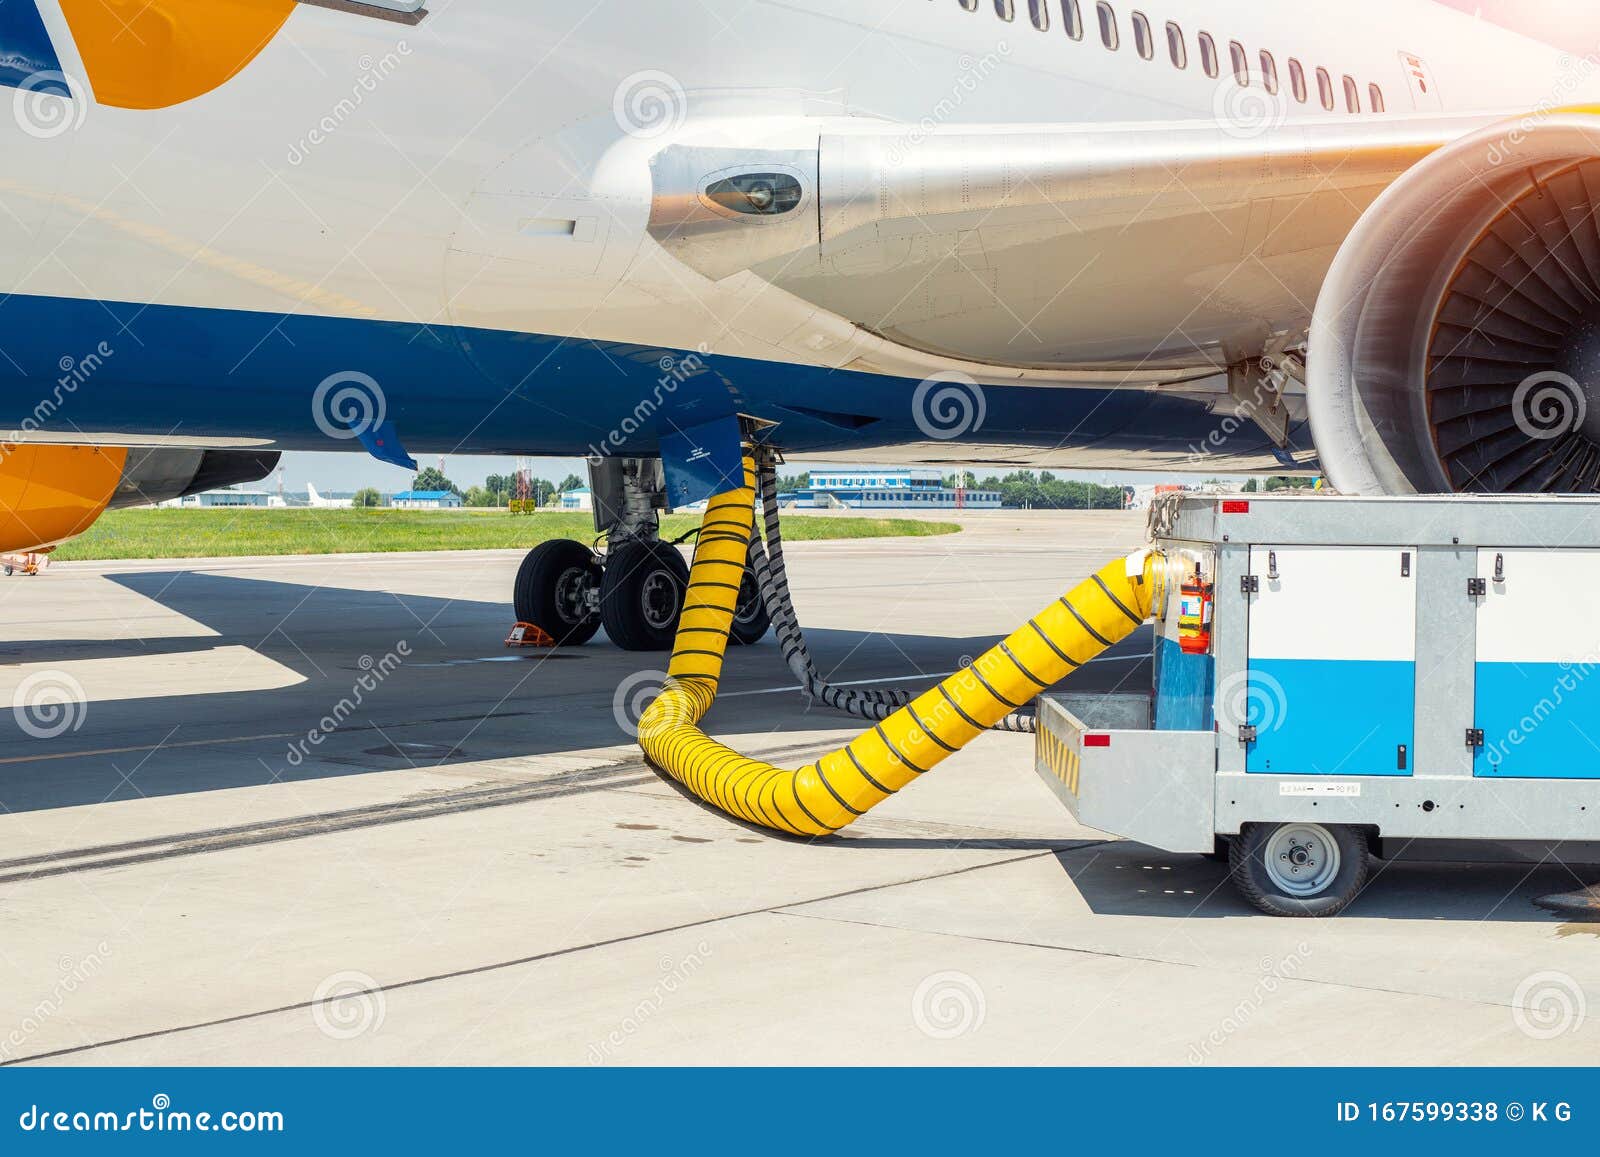 Big Modern Commercial Plane Parked On Airport Runway And Connected To  Ground Supply Power Unit. Aircraft Maintenance Stock Photo - Image Of  Aviation, Electric: 167599338